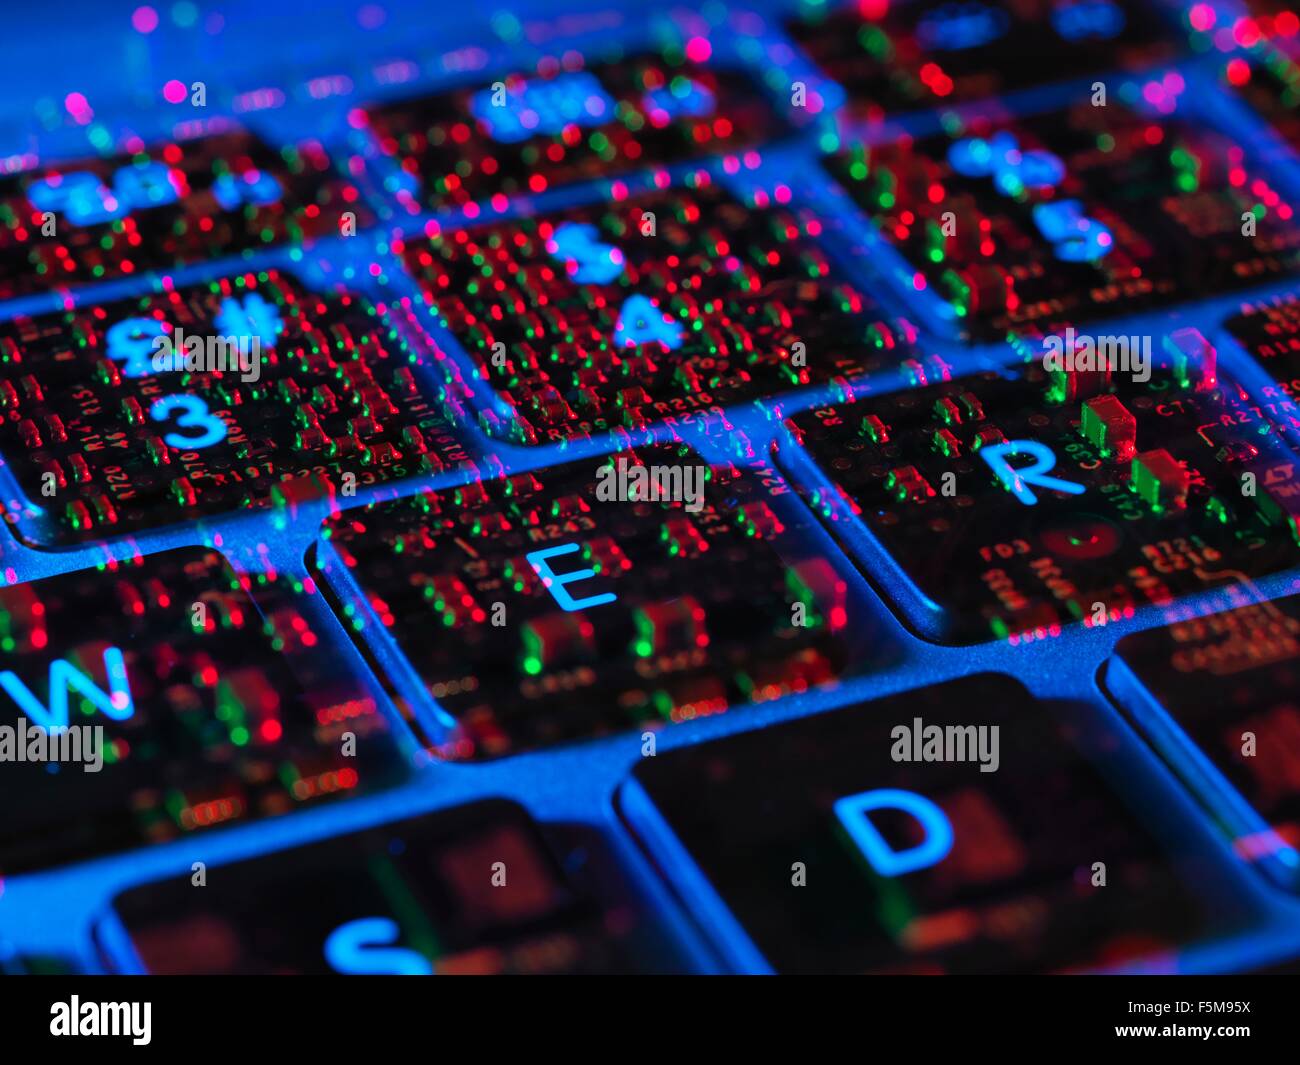 Double exposure of the inside and out of a laptop computer showing the electronic components under the keyboard Stock Photo